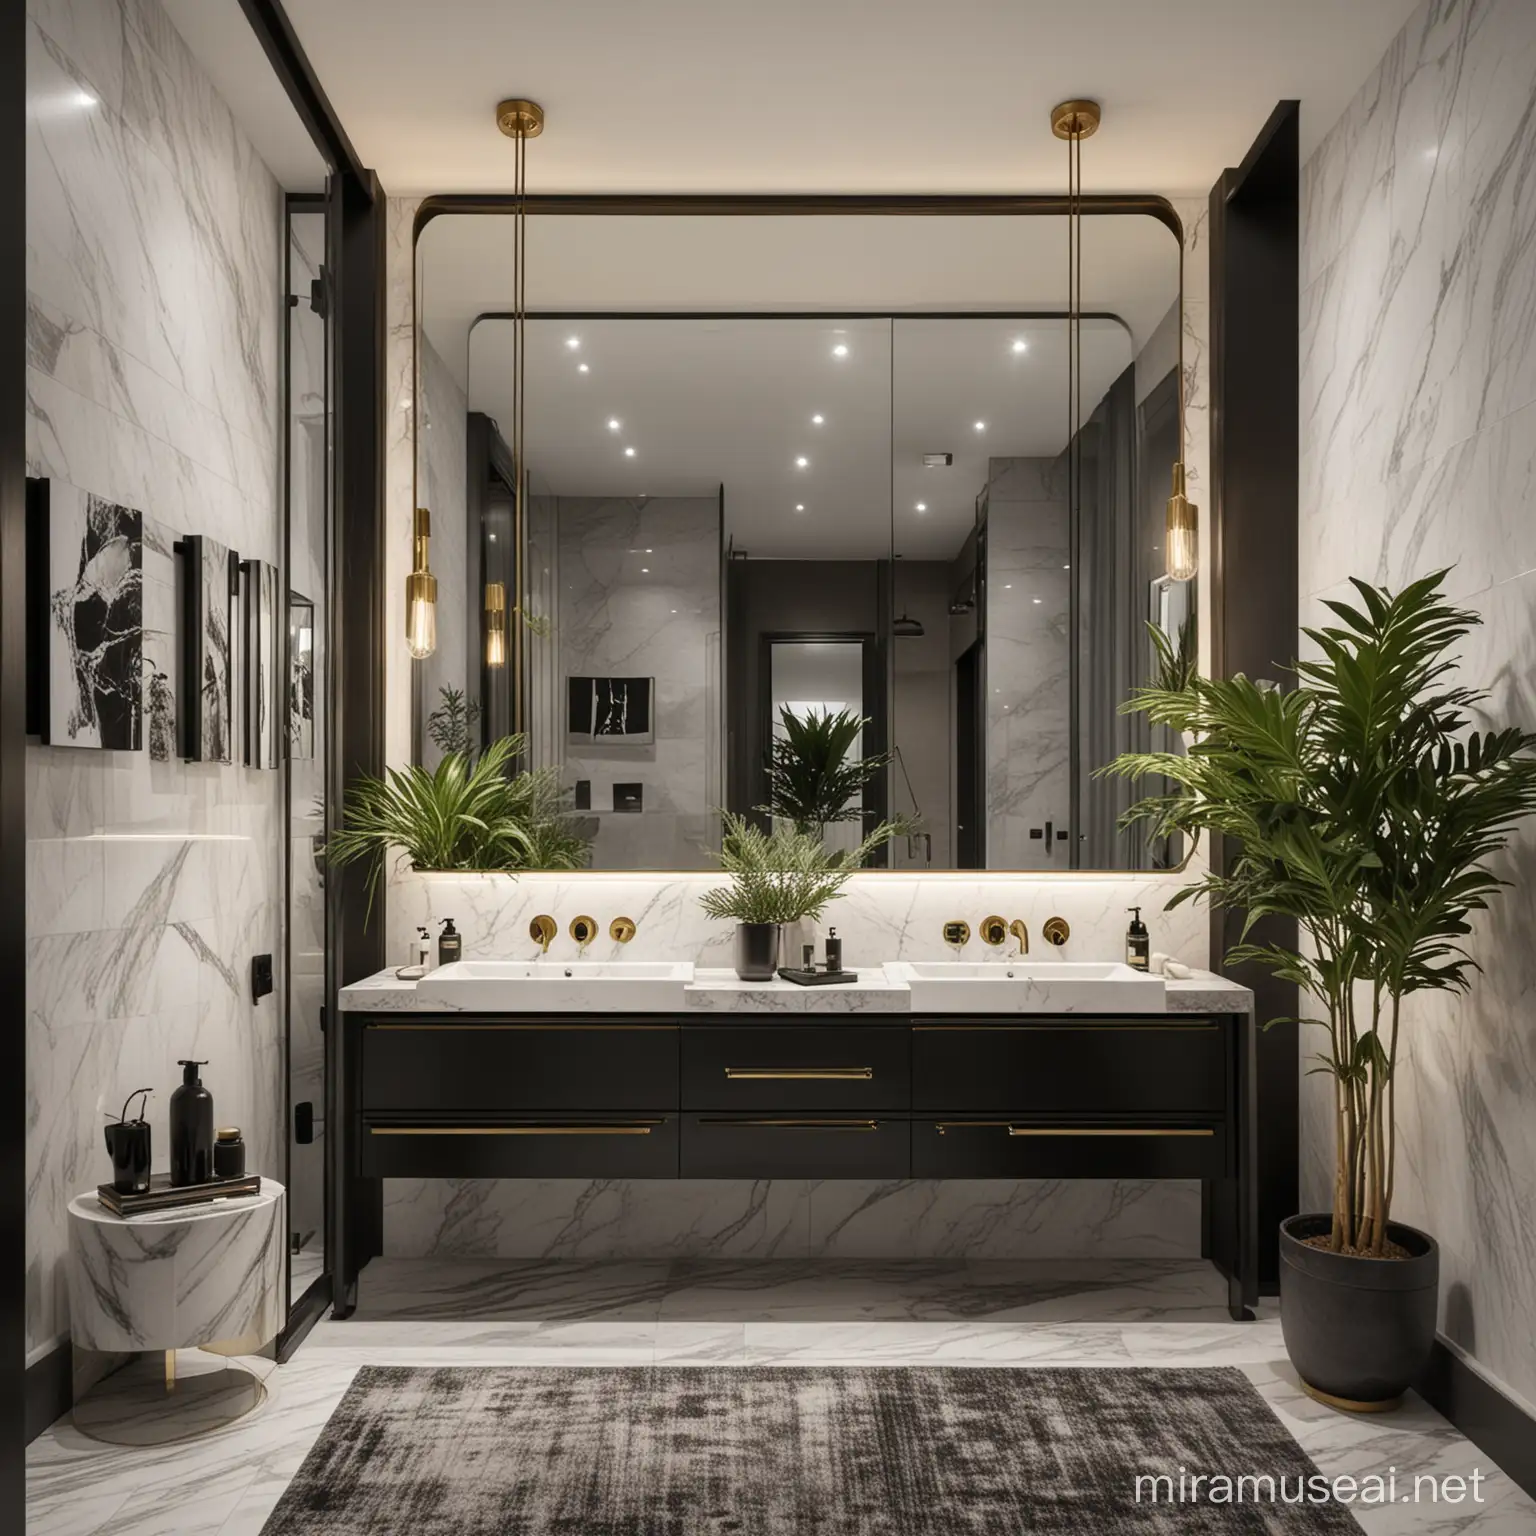 black, light grey, black wood, marble , modern bathroom  with brass elements, amazing modern lamps, art on the wall,plants, soft carpet, one mirror